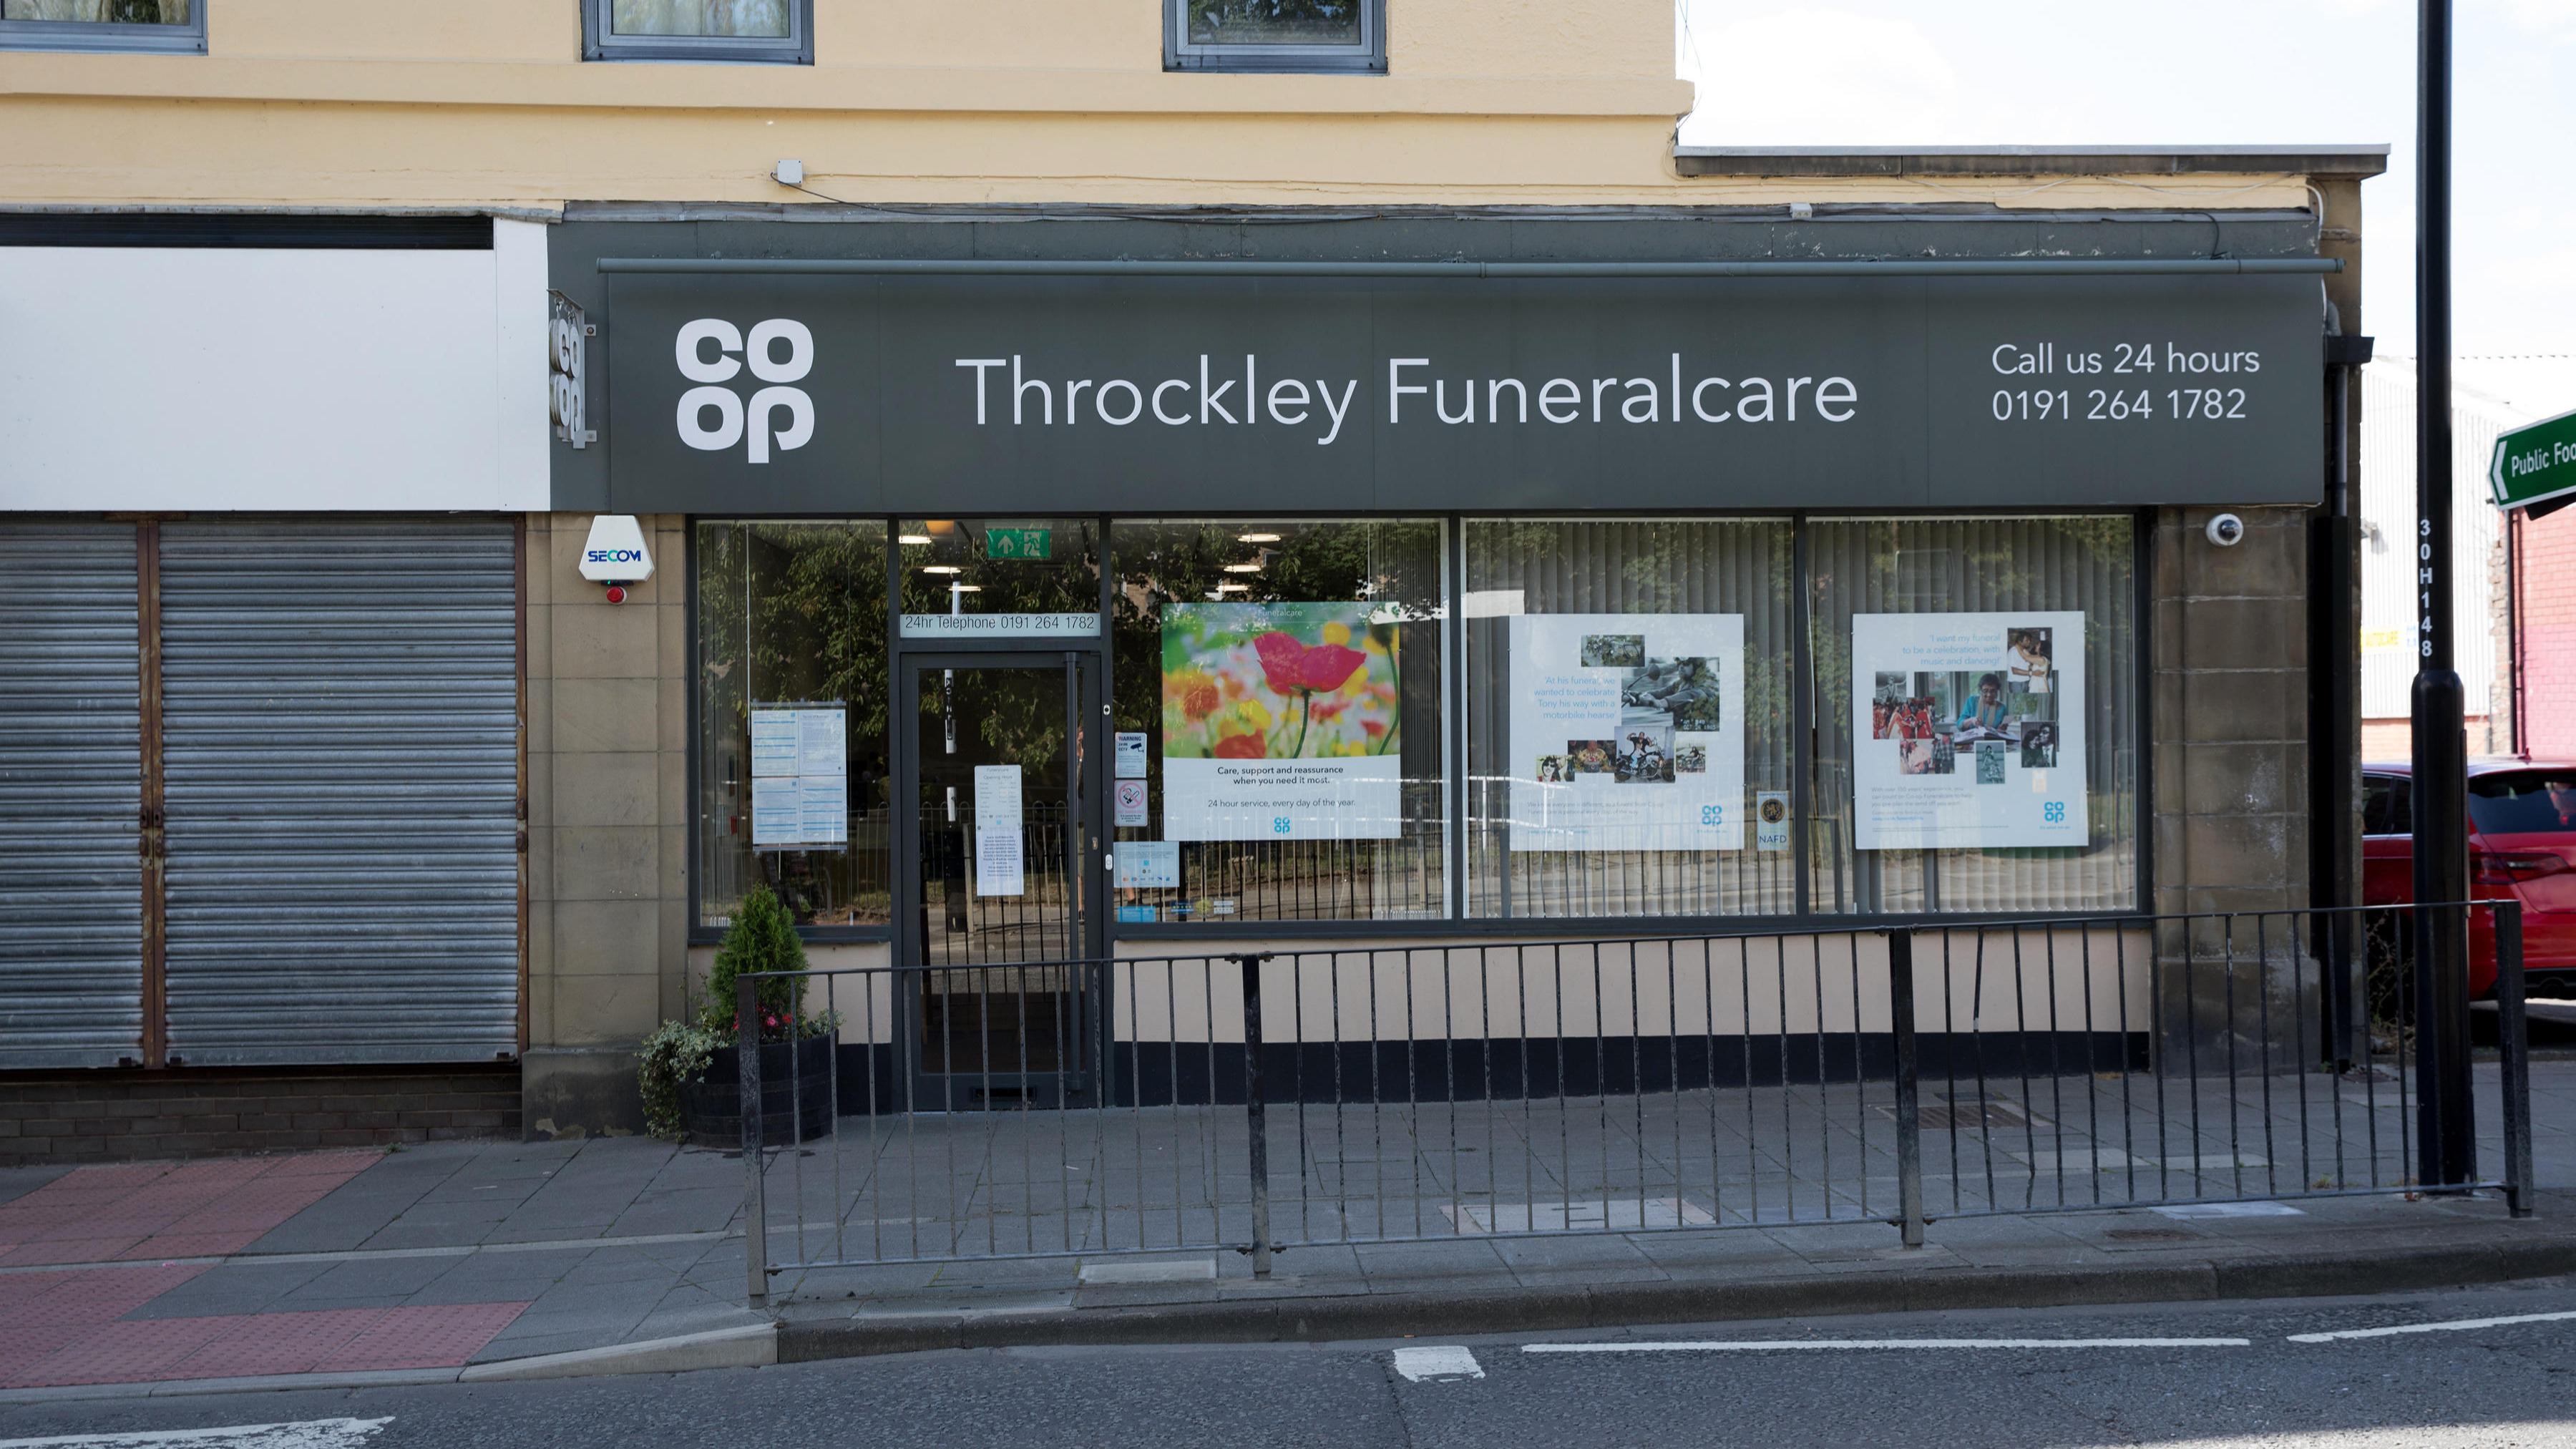 Images Throckley Funeralcare